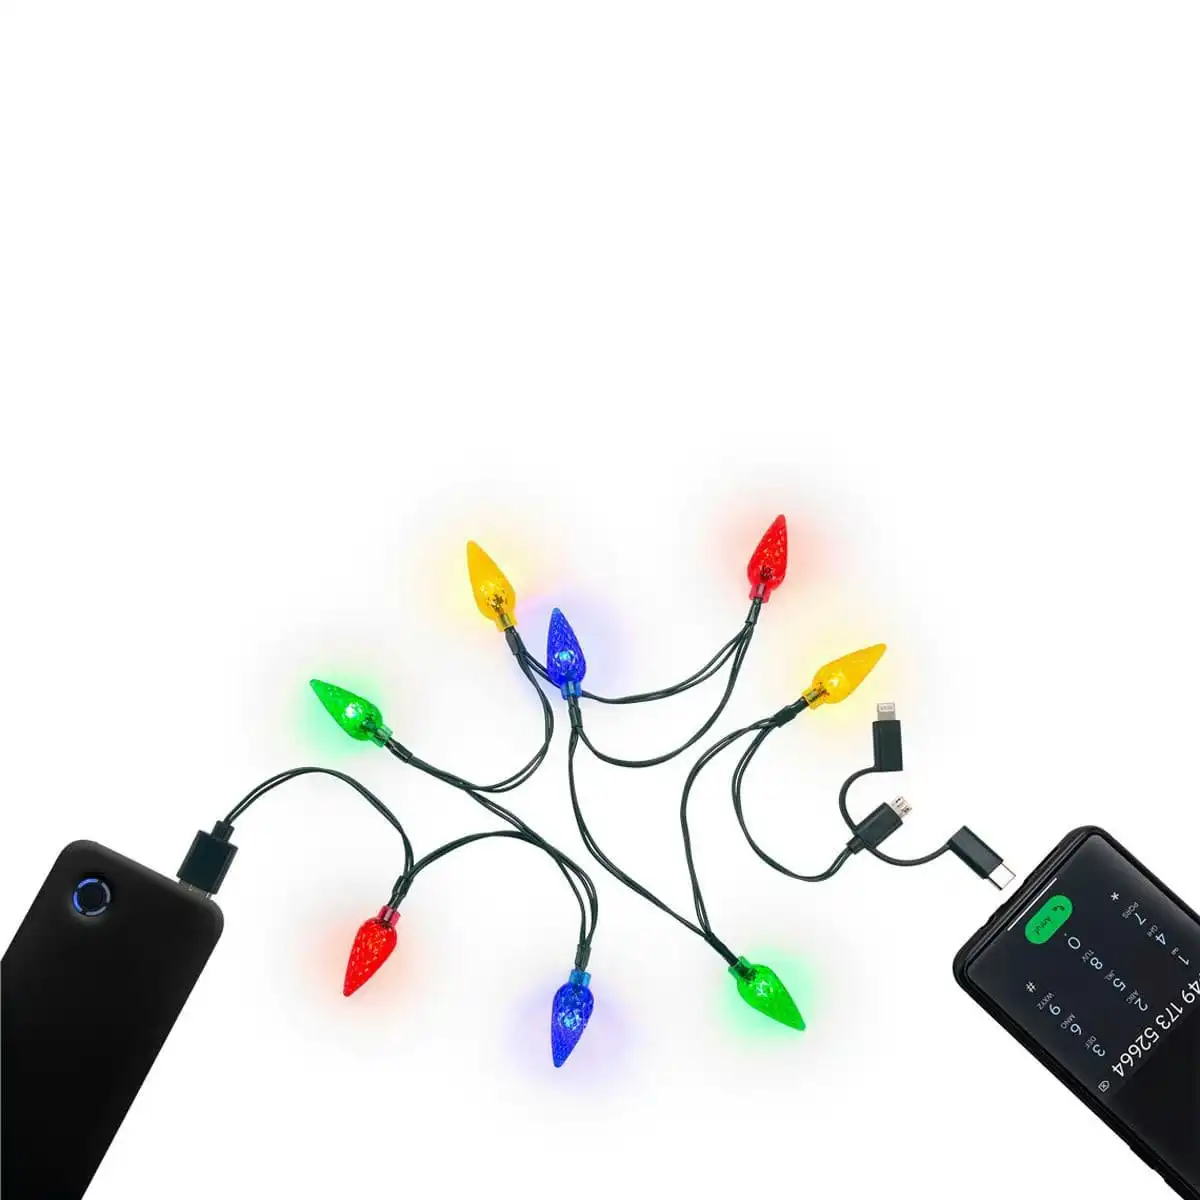 Goobay Smartphone USB-A Charging Cable with LED Lights for Smartphones